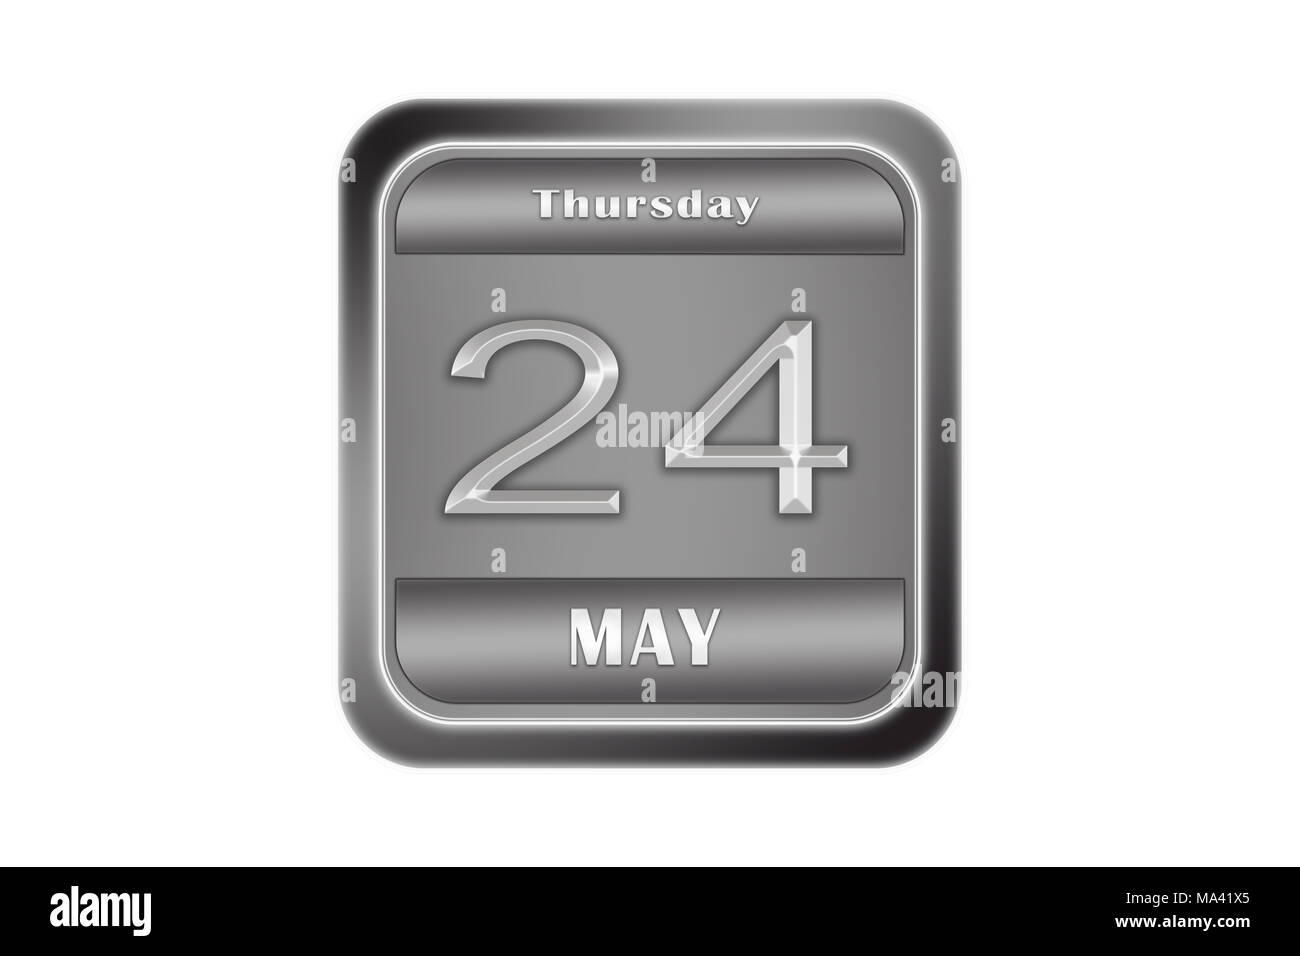 Date may 24, Thursday written on a metal plate Stock Photo